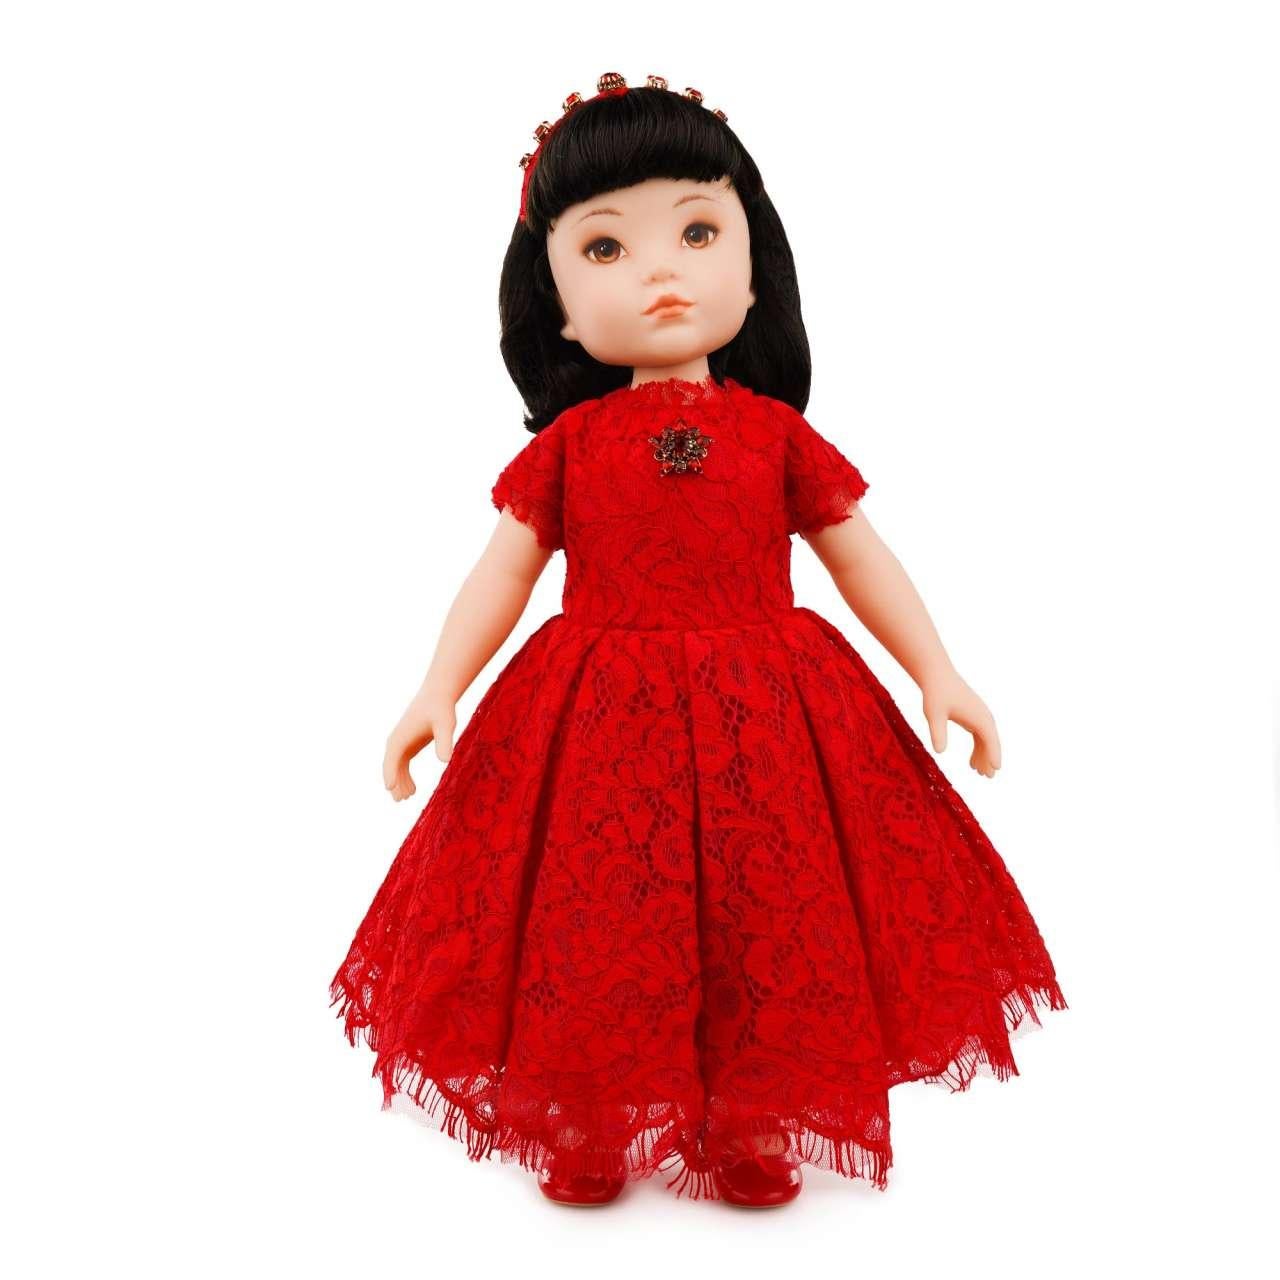 - Big Doll with hairband, crystal brooch and red lace dress by DOLCE & GABBANA - Former RRP: EUR 650 - New with Box - MADE IN ITALY - Red lace dress - Silky underwear - Model: LCJA18-G7VAW-S9000 - Material: Rayon 40%, Nylon 30%, Polyester 30% -